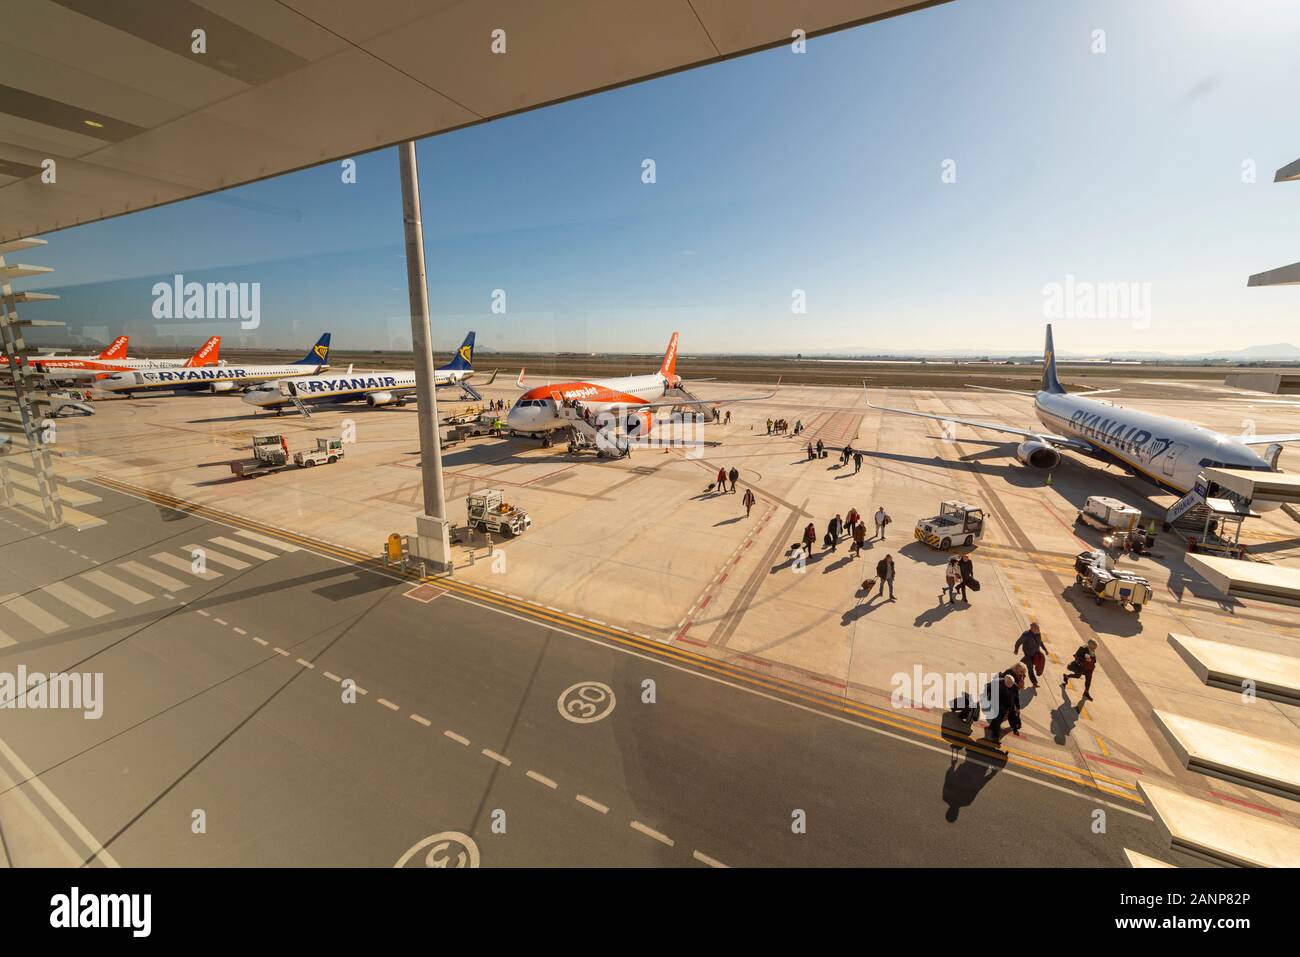 Region de Murcia International Airport, Corvera, Costa Calida, Spain, Europe. Busy with easyJet and Ryanair jet airliner planes. Passengers exiting Stock Photo